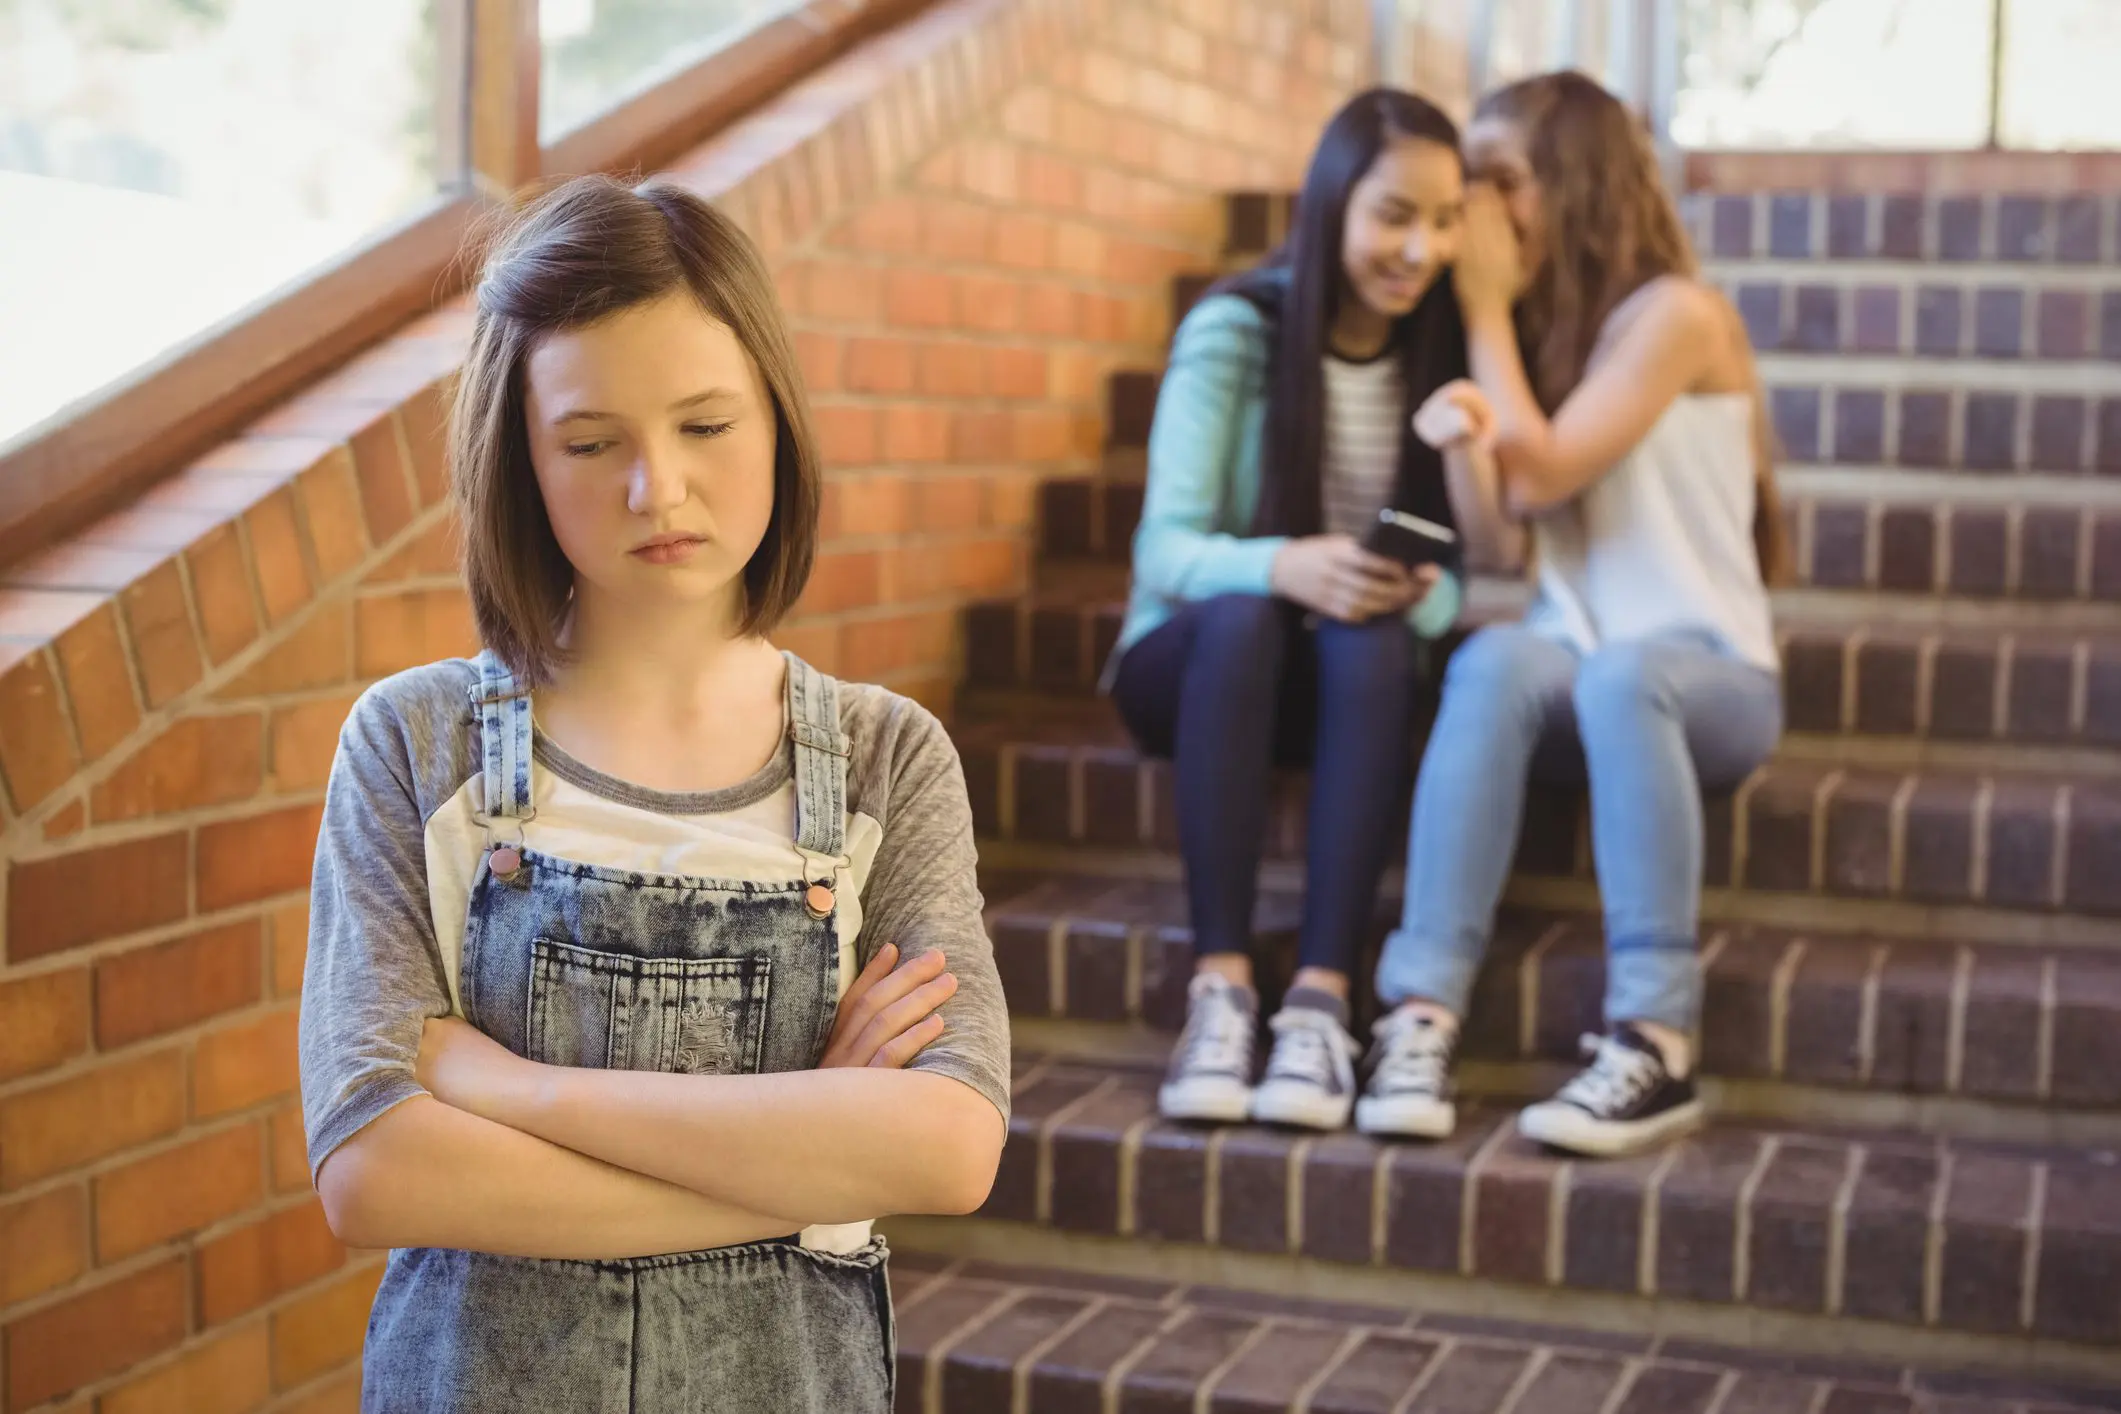 Top Resources On Bullying For National Bullying Prevention Month